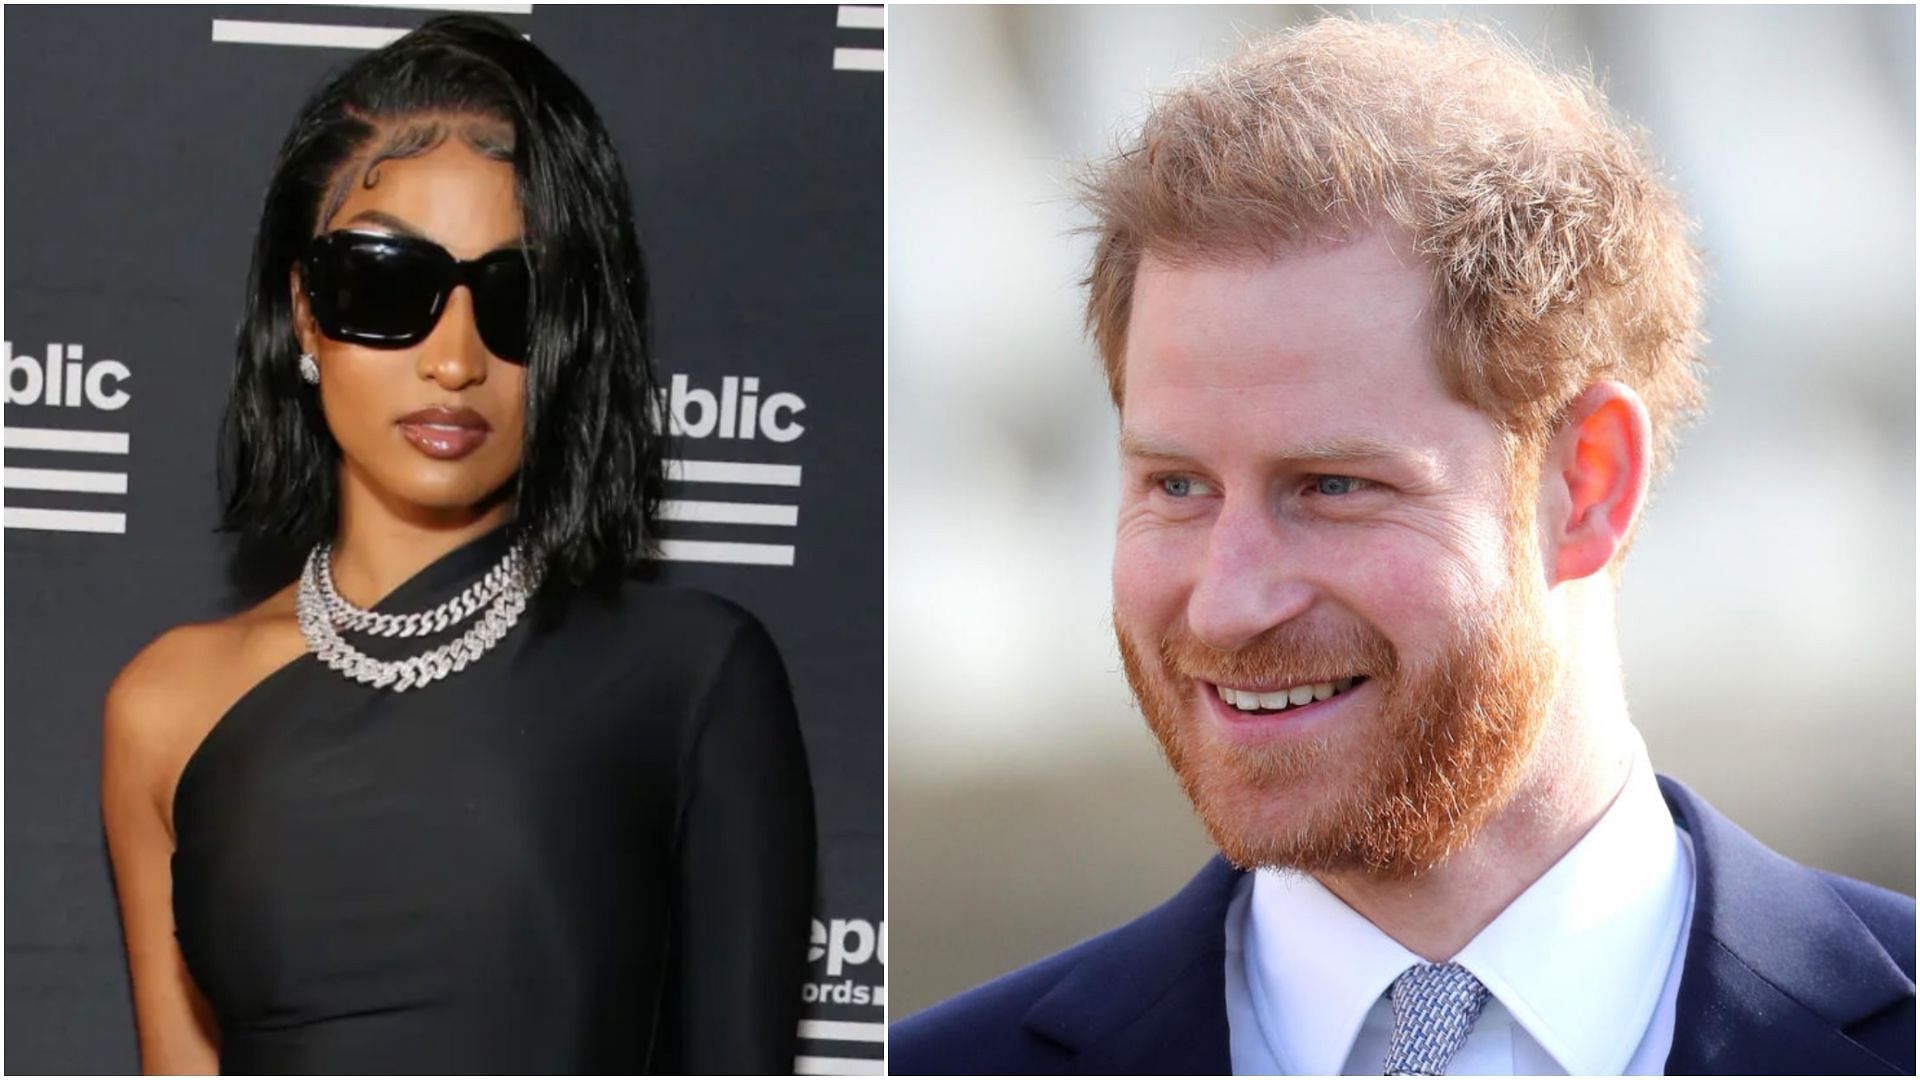 Prince harry has revealed that he listens to Shenseea